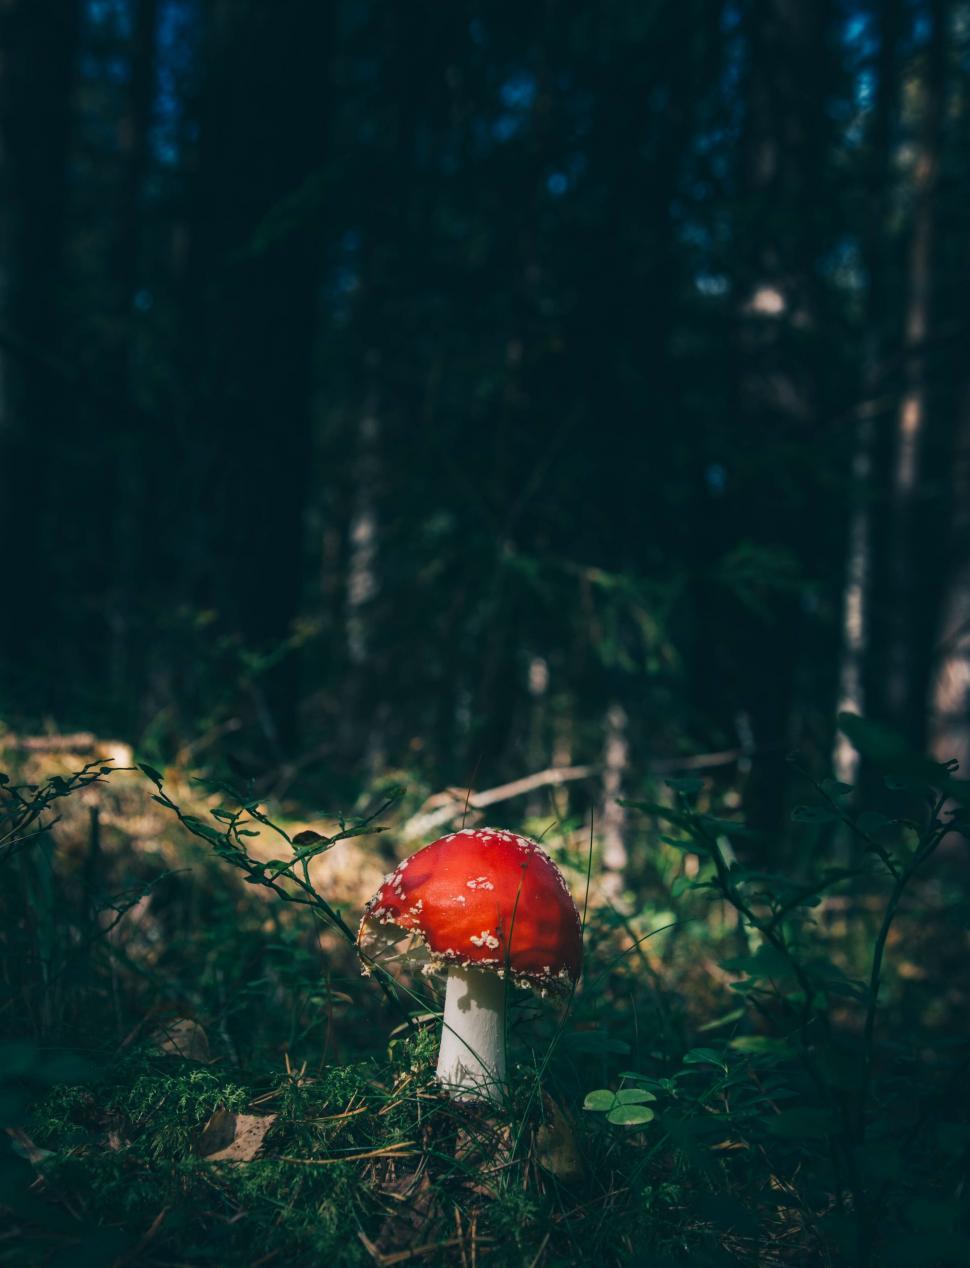 Free Image of Single mushroom in a shadowy forest 